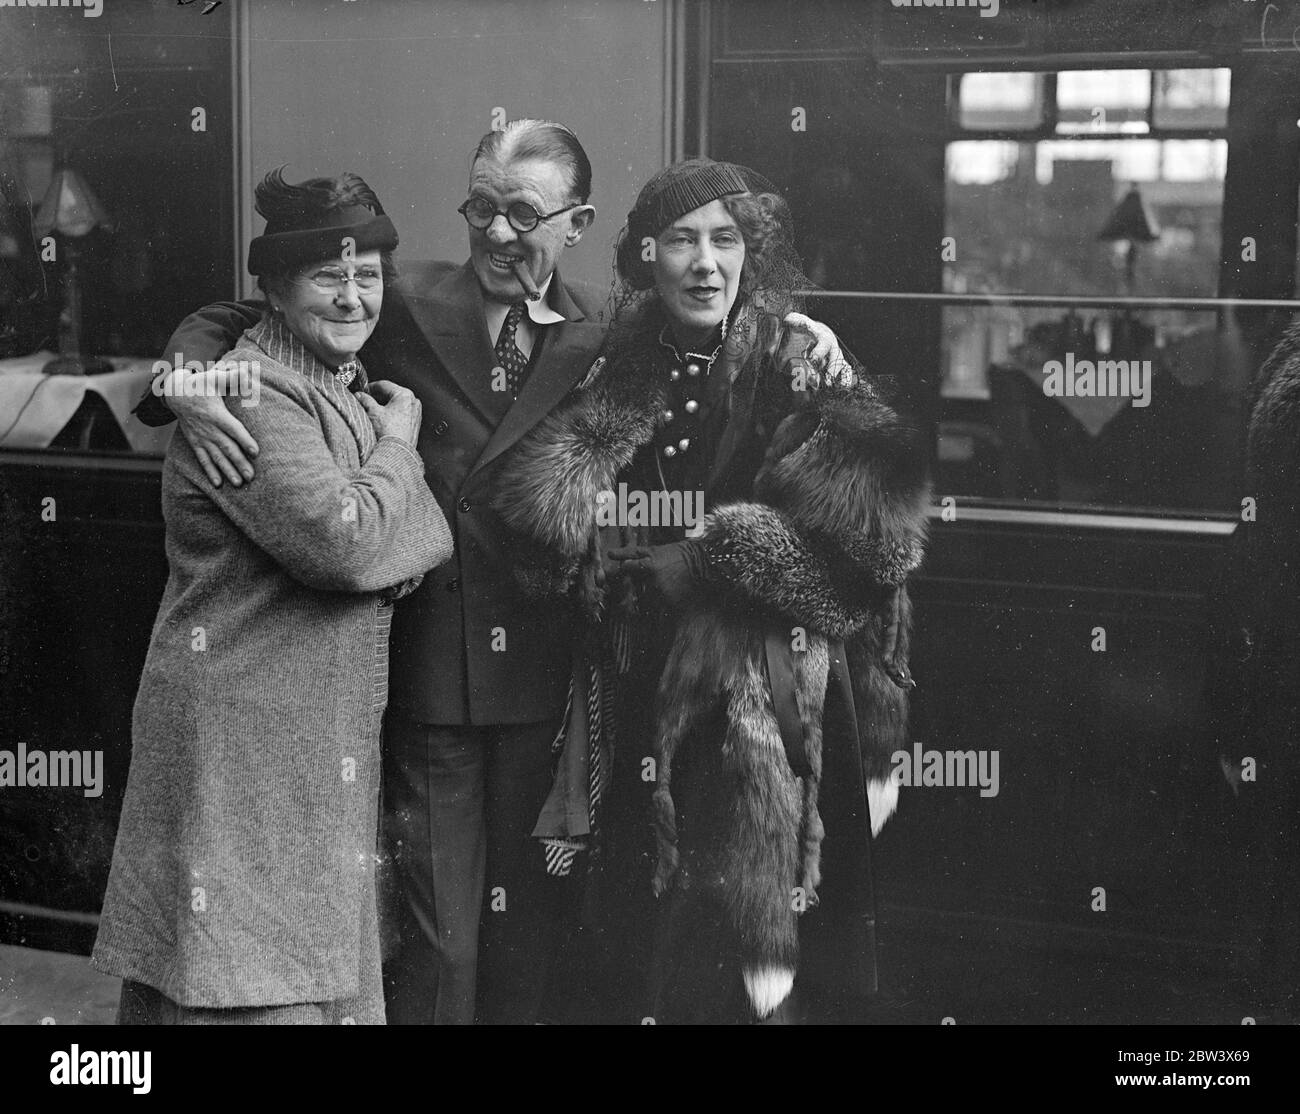 Woolsey , of Wheeler and Woolsey , welcome his wife and mother to London . Robert Woolsey , of Wheeler and Woolsey , the film comedian , was at Waterloo Station to welcome his wife and mother when they arrived on the ' Normandie ' boat train from America . Photo shows , Robert Woolsey , smoking a cigar as usual , with his wife , and mother on their arrival at Waterloo . 24 August 1936 Original caption from negative Stock Photo